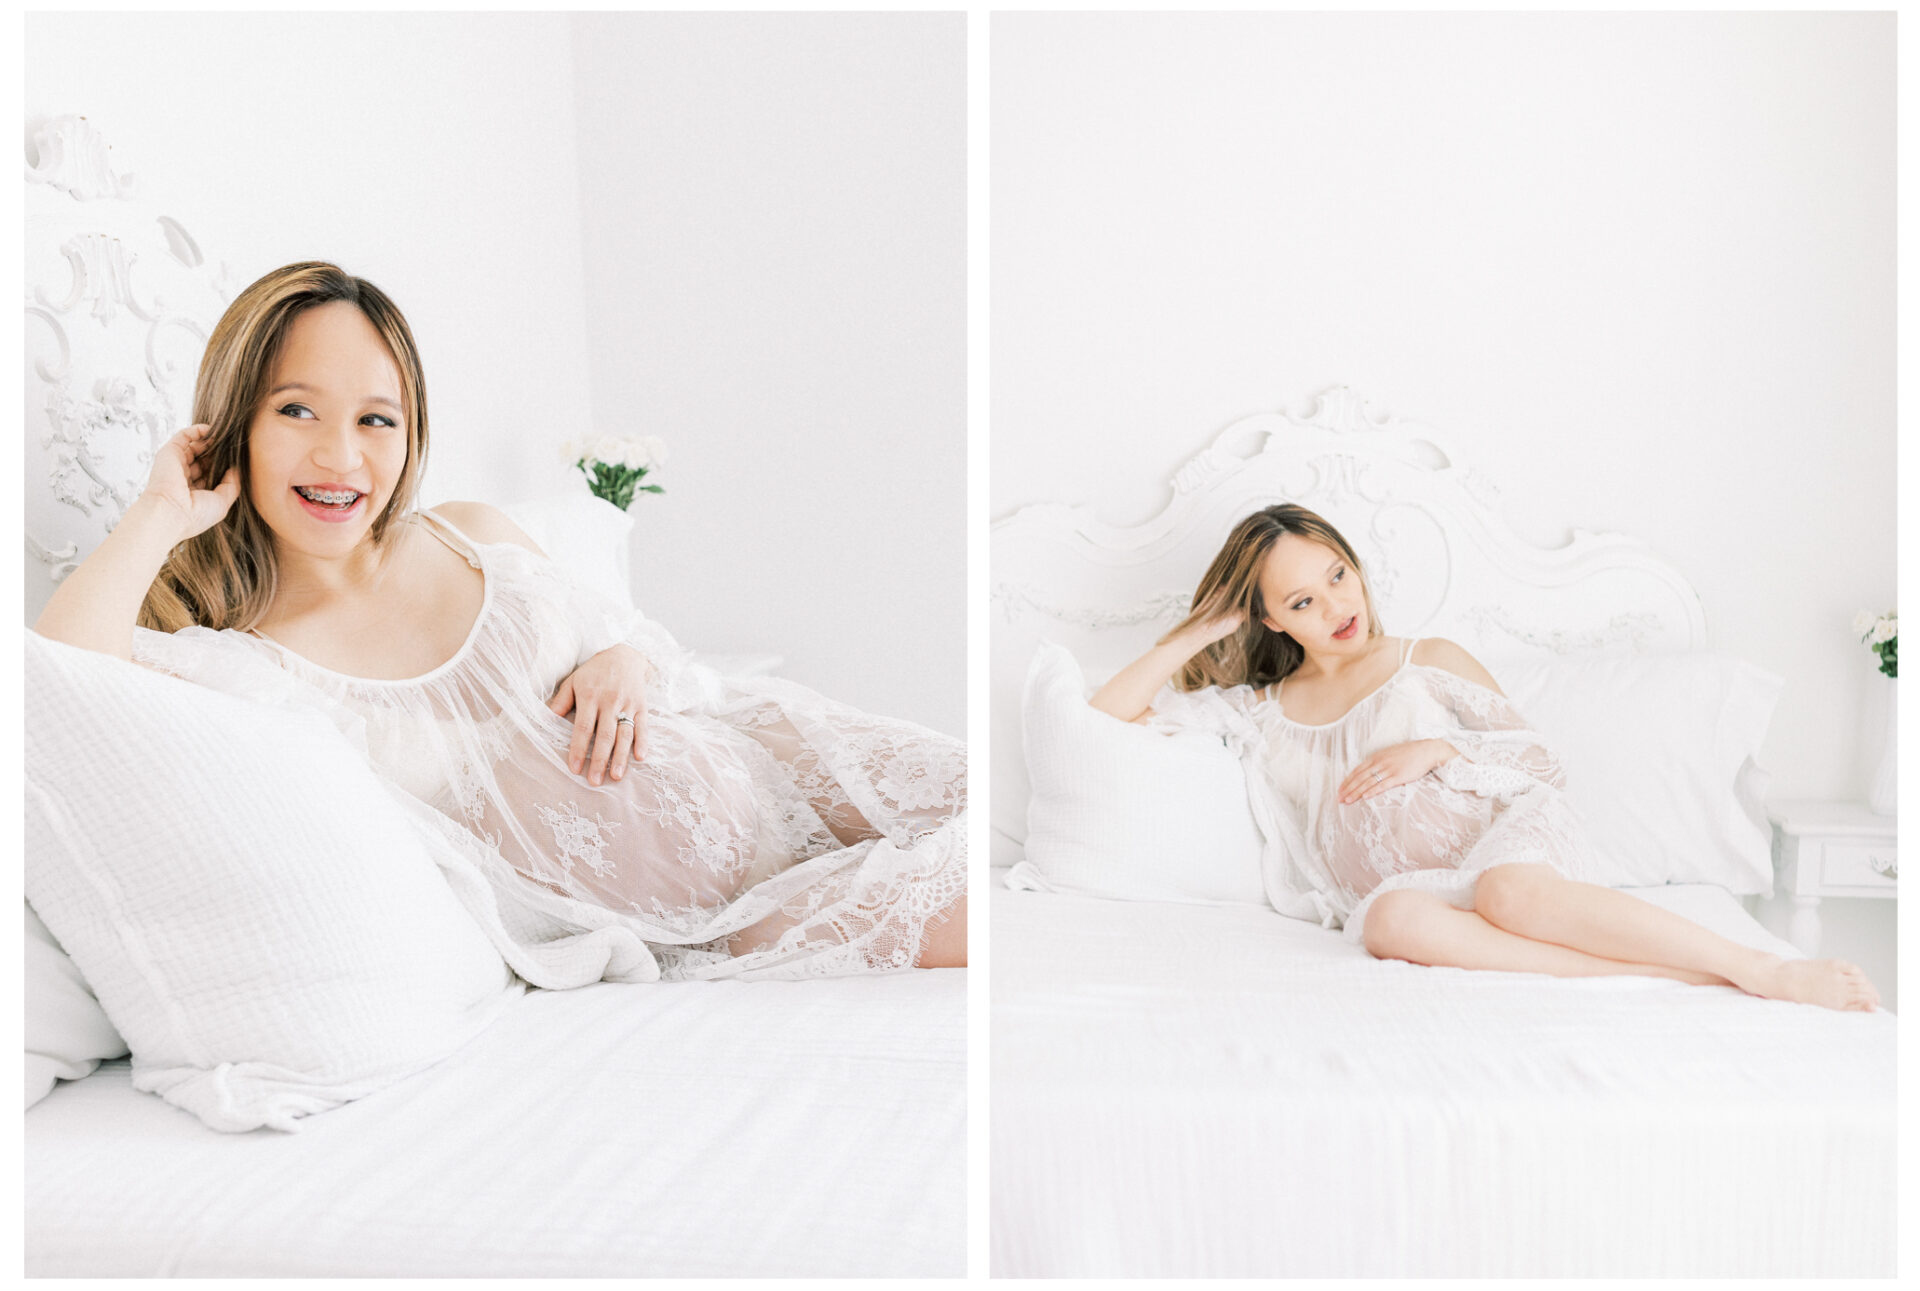 Winter Freire Photography | Fine Art Maternity Boudoir | Expecting mother laying against a vintage headboard wearing a sheer lace dress